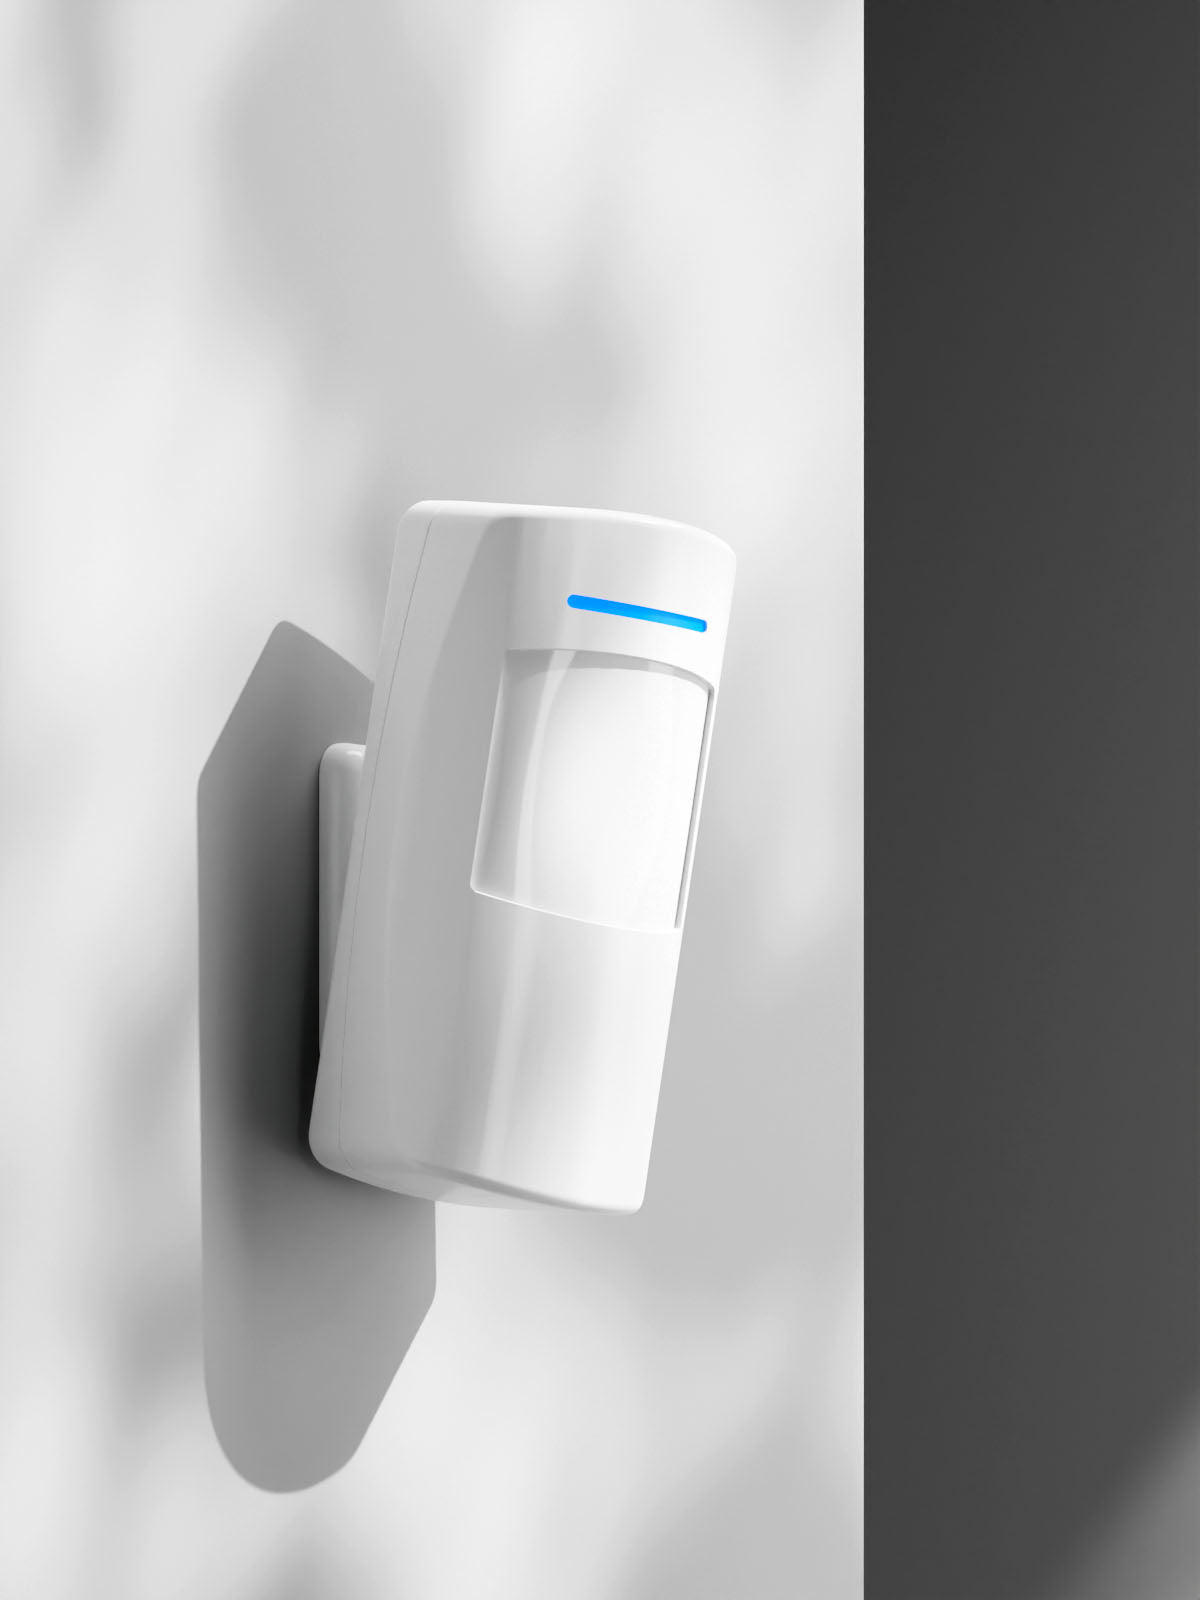 PIR Motion Sensor positioned on white smooth wall looking towards the right, with soft overlay outdoor shadows